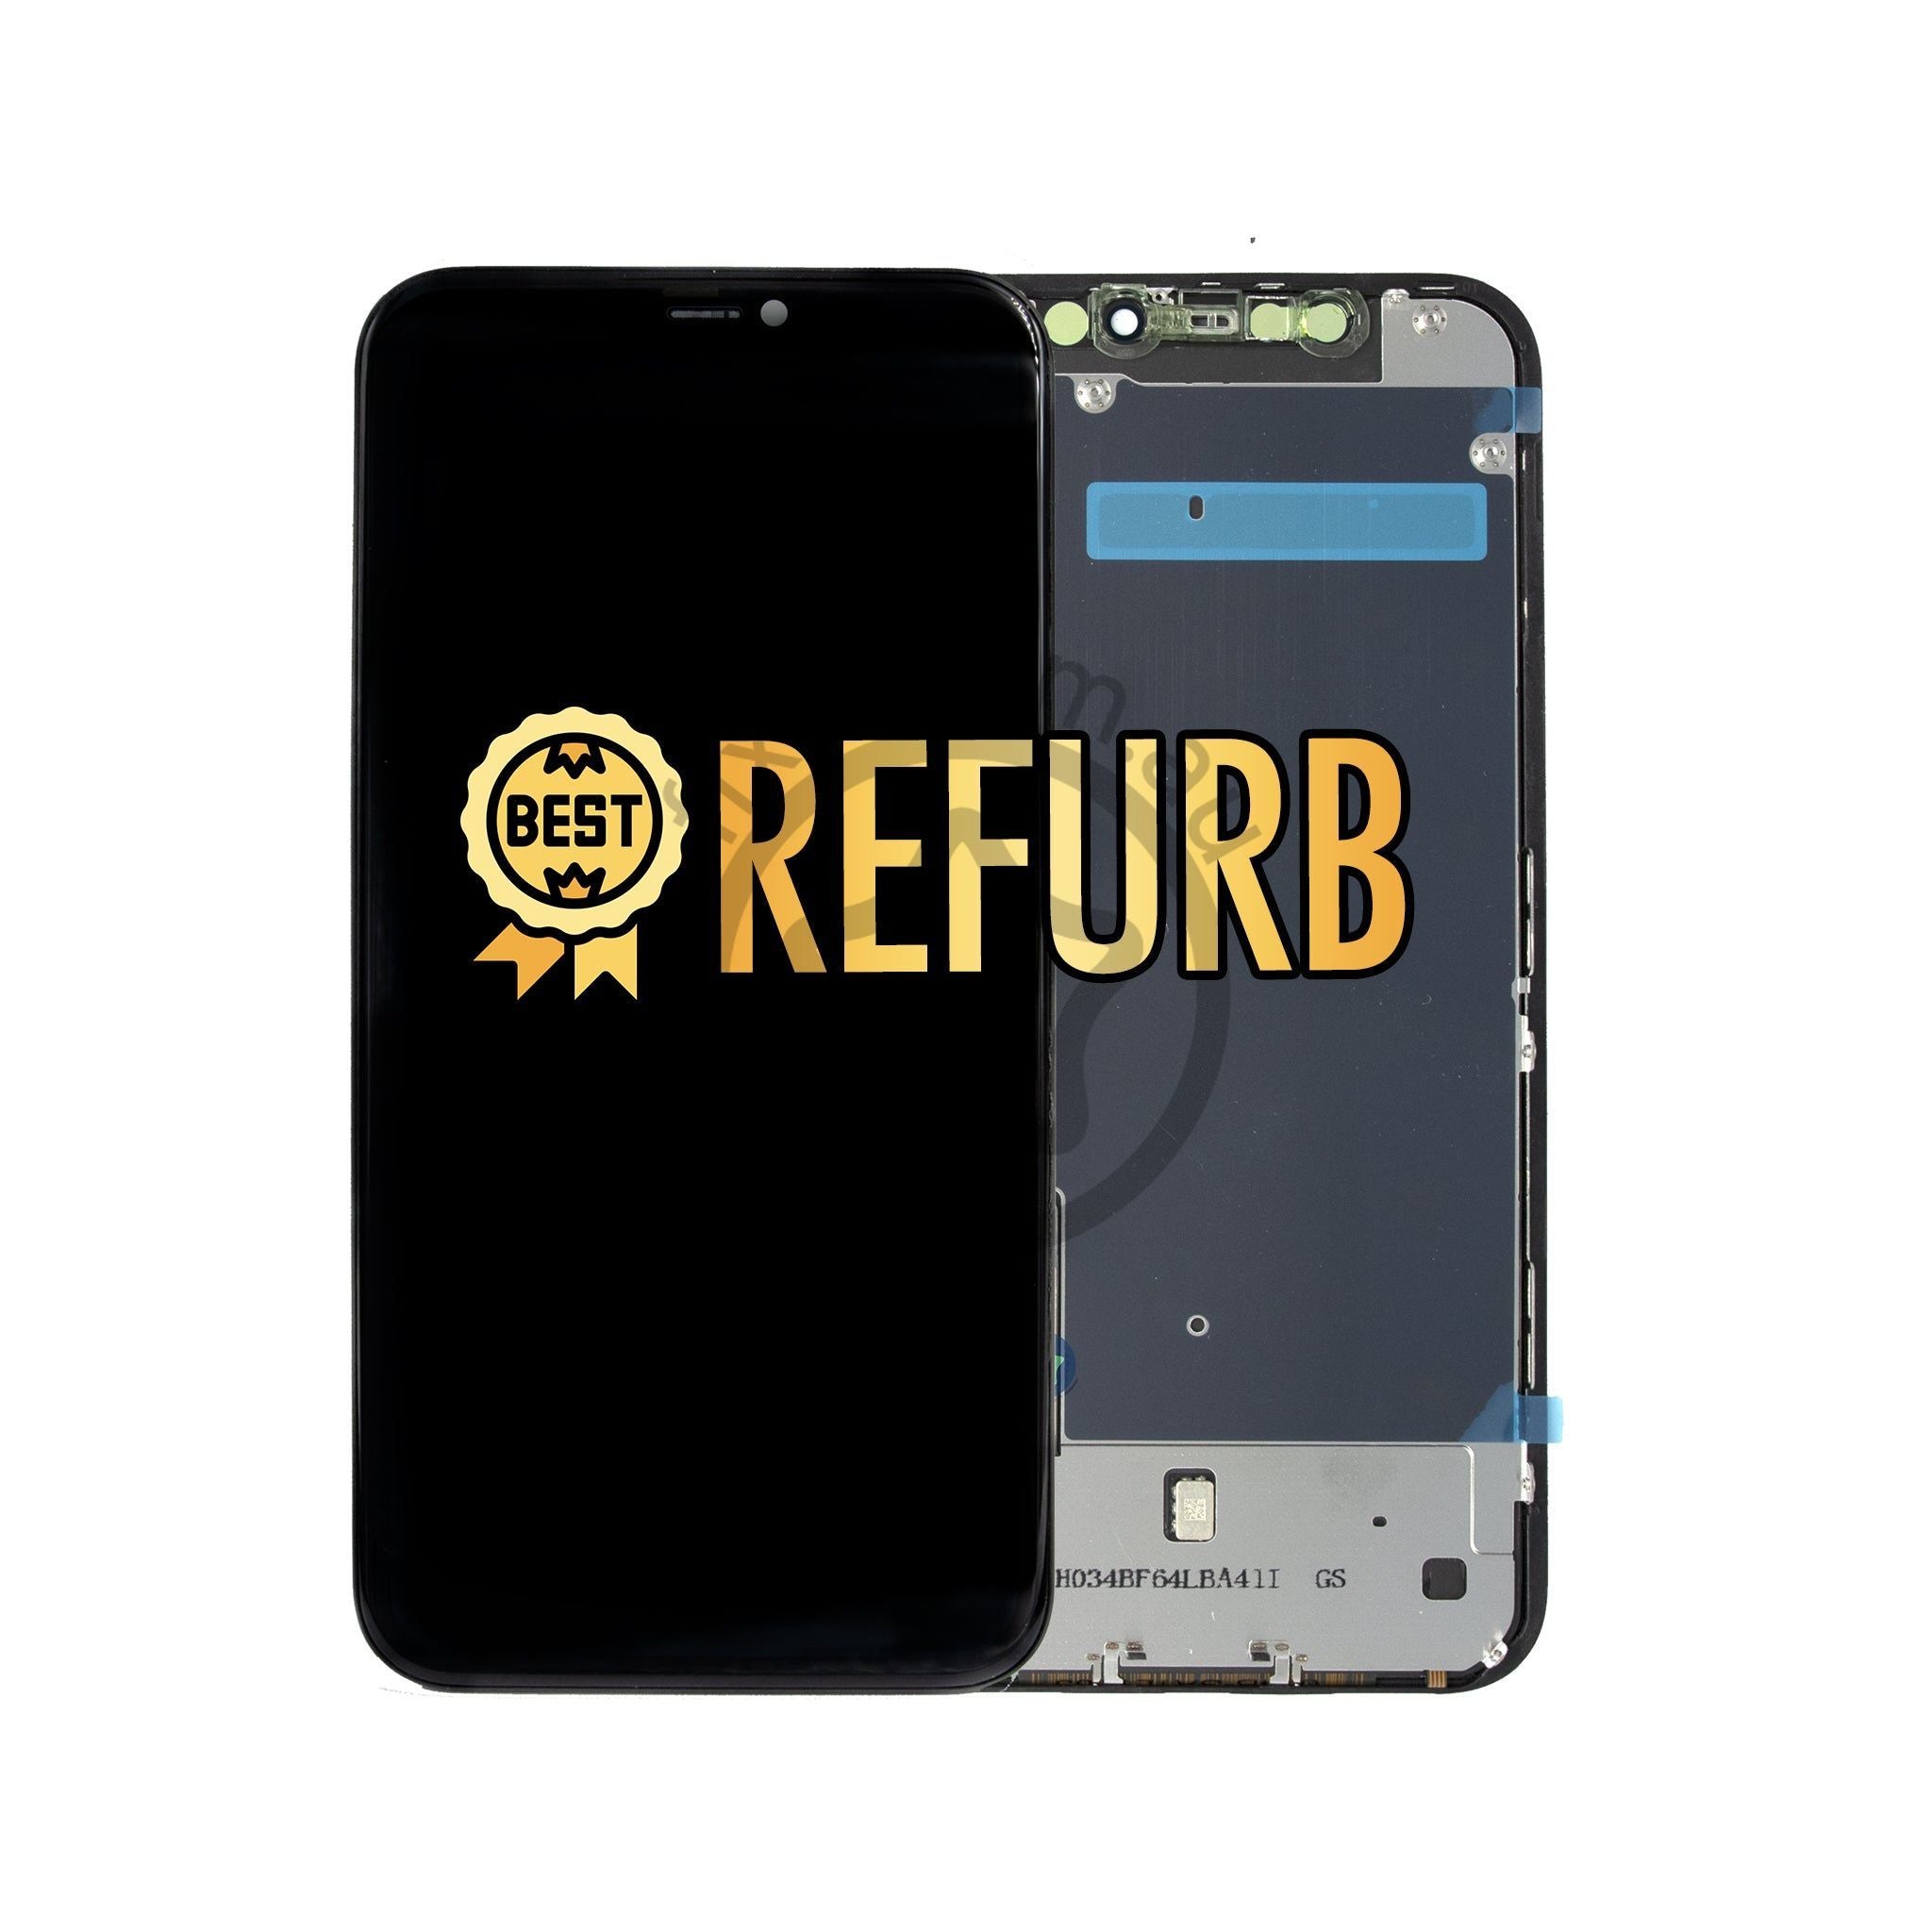 Fixxo - iPhone Back Glass Replacement